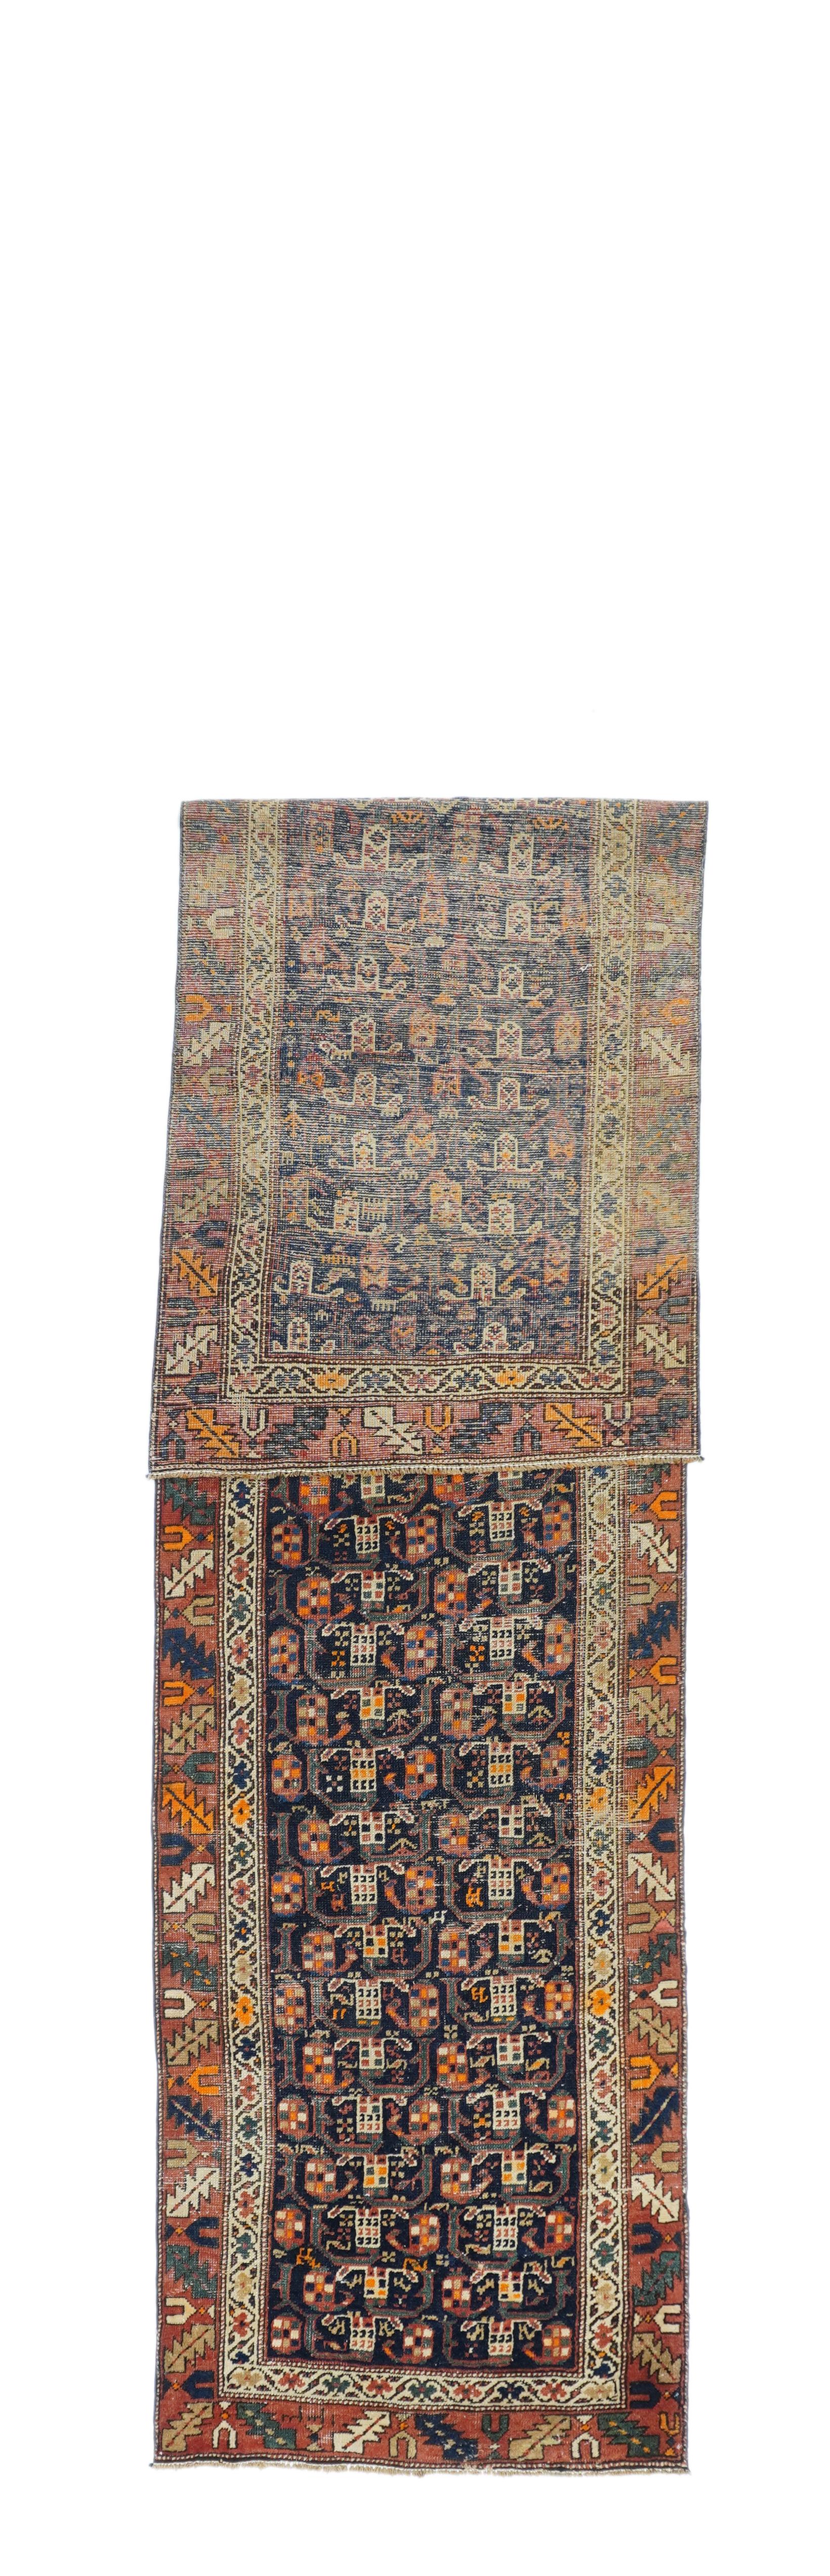 Antique North West Runner 2'11'' x 13'6''. The navy field displays two columns of beige baskets and polychromed botehs, with green curvy sterms. The red main border features a Caucasian-style slanted leaf and calyx patter. Inner ecru border with